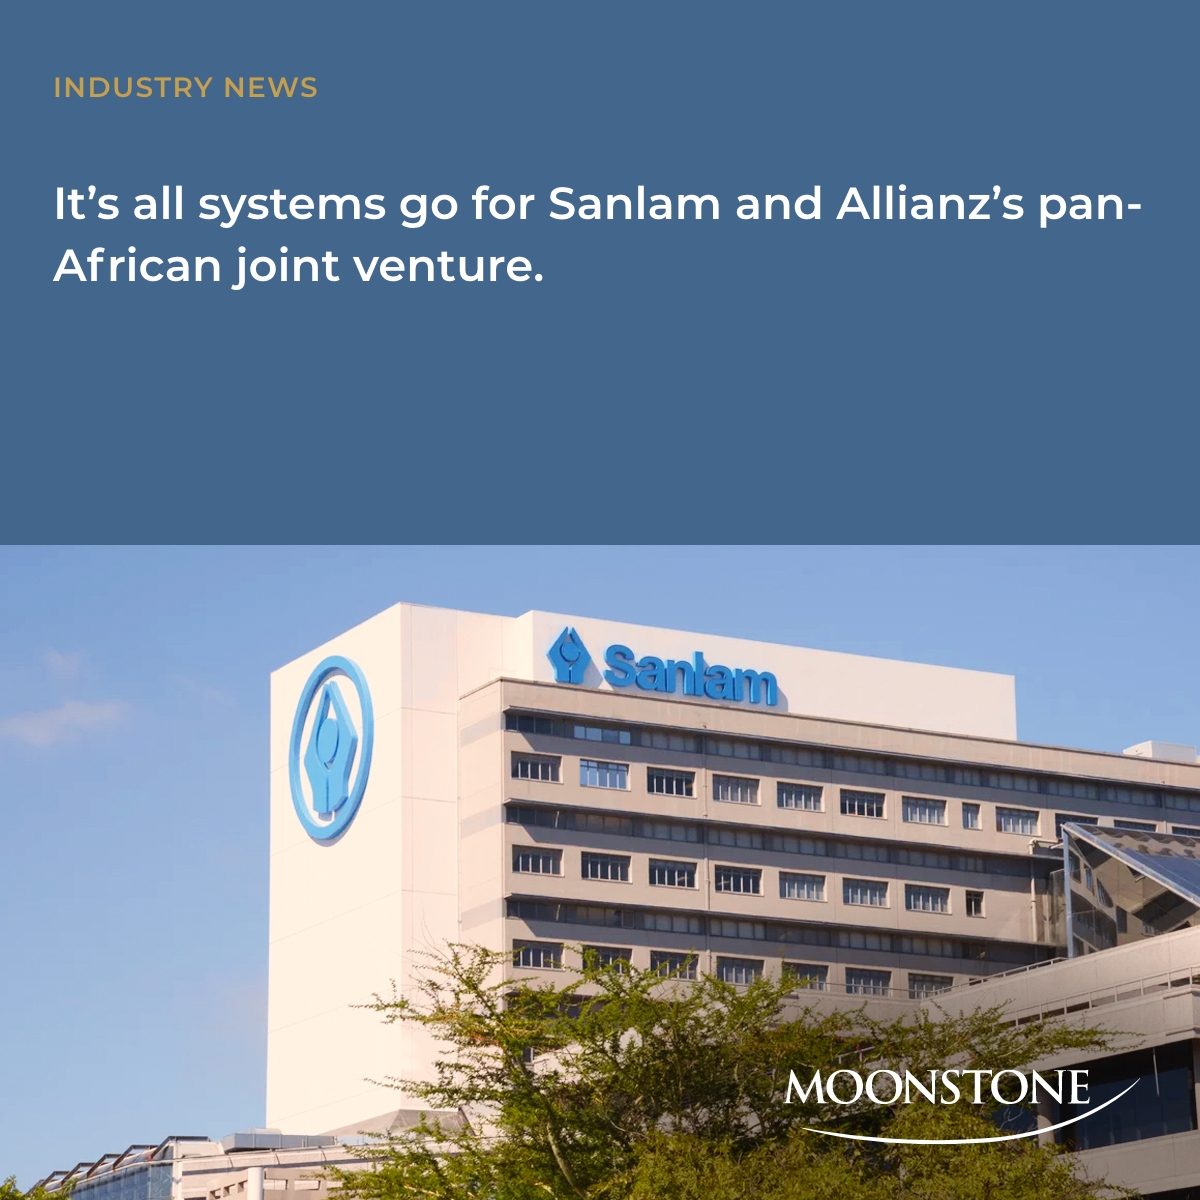 Sanlam and Allianz’s joint venture sets sights on African growth. bit.ly/3R822PX 
#Allianz #financialservices #insurance #Sanlam #SanlamAllianz #financialservices